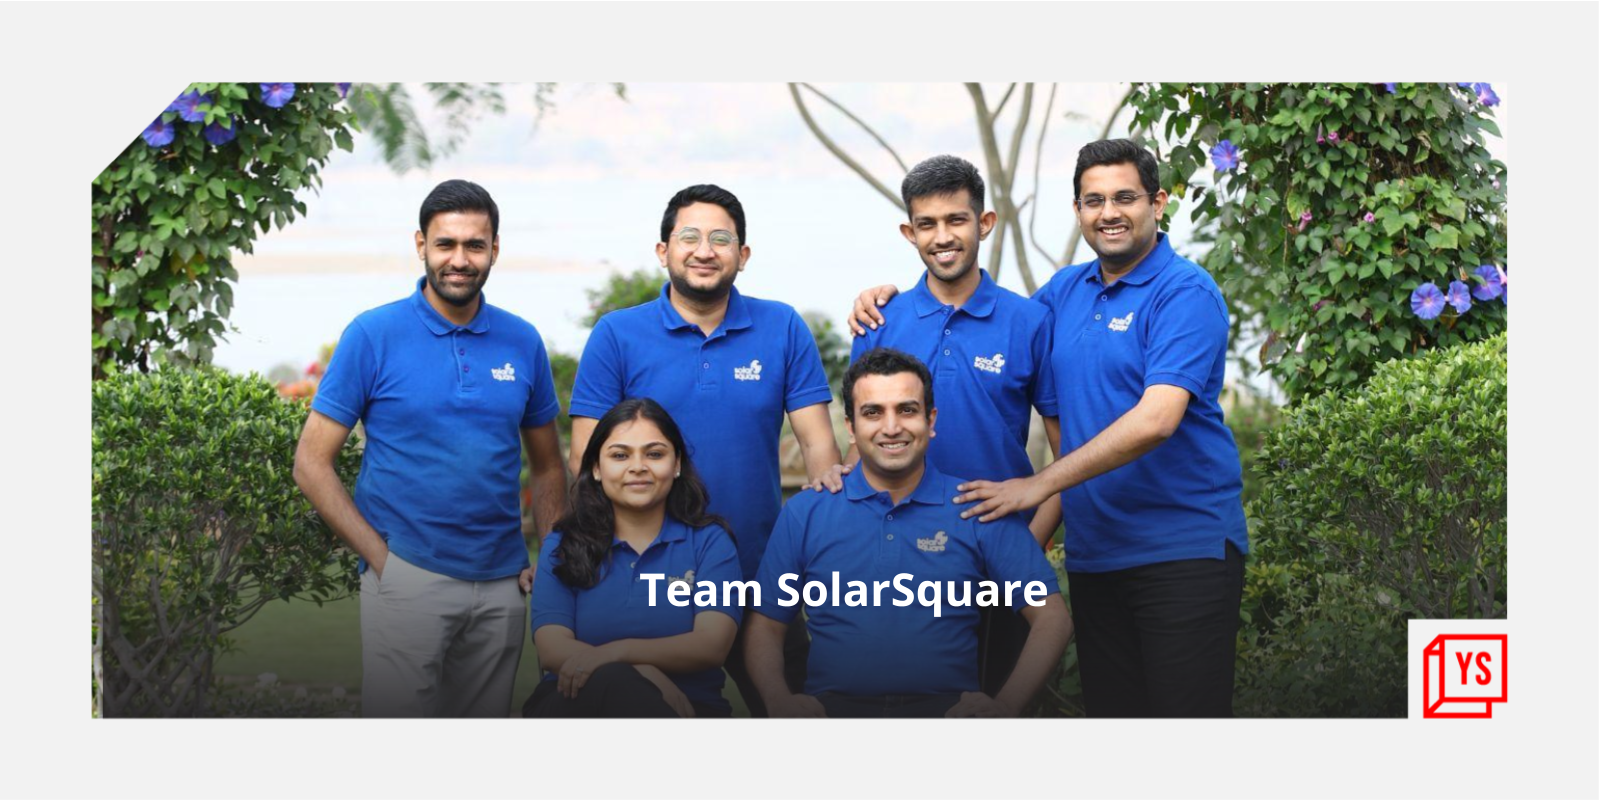 [Funding alert] SolarSquare raises $4M in seed round led by Good Capital